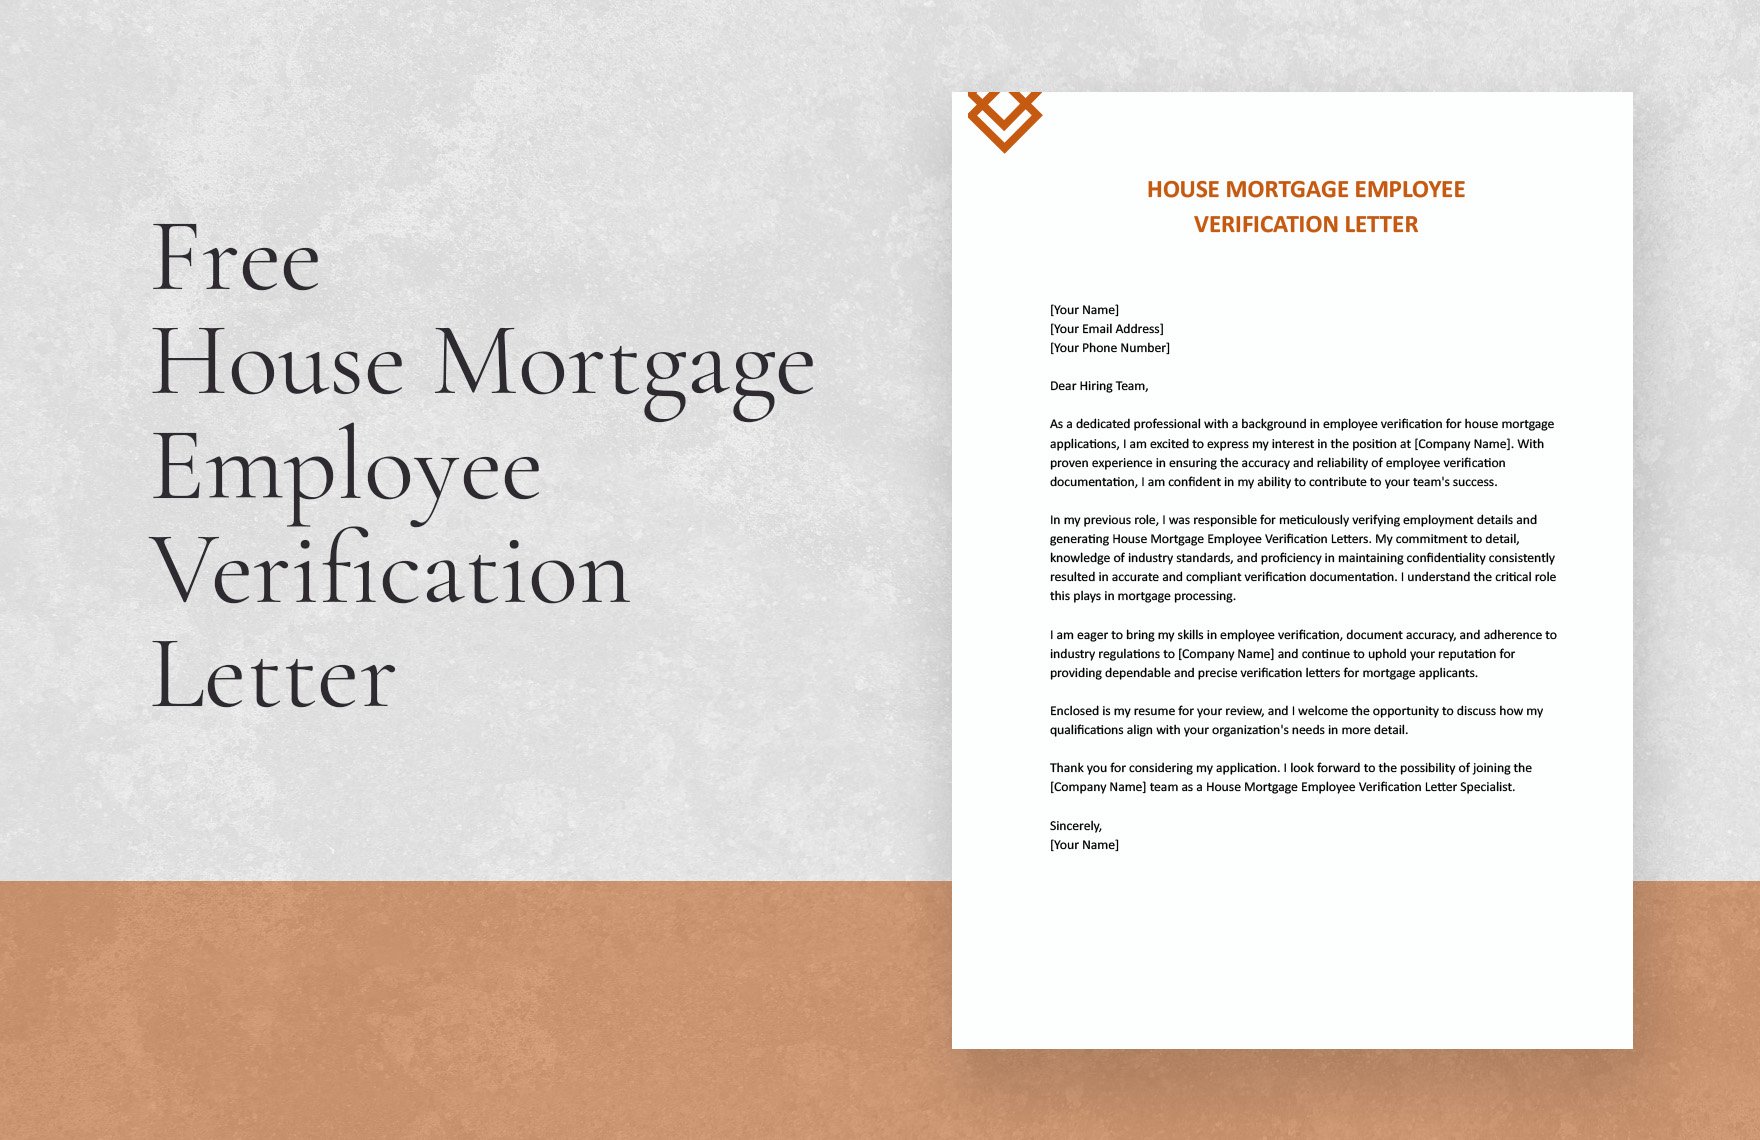 House Mortgage Employee Verification Letter in Word, Google Docs